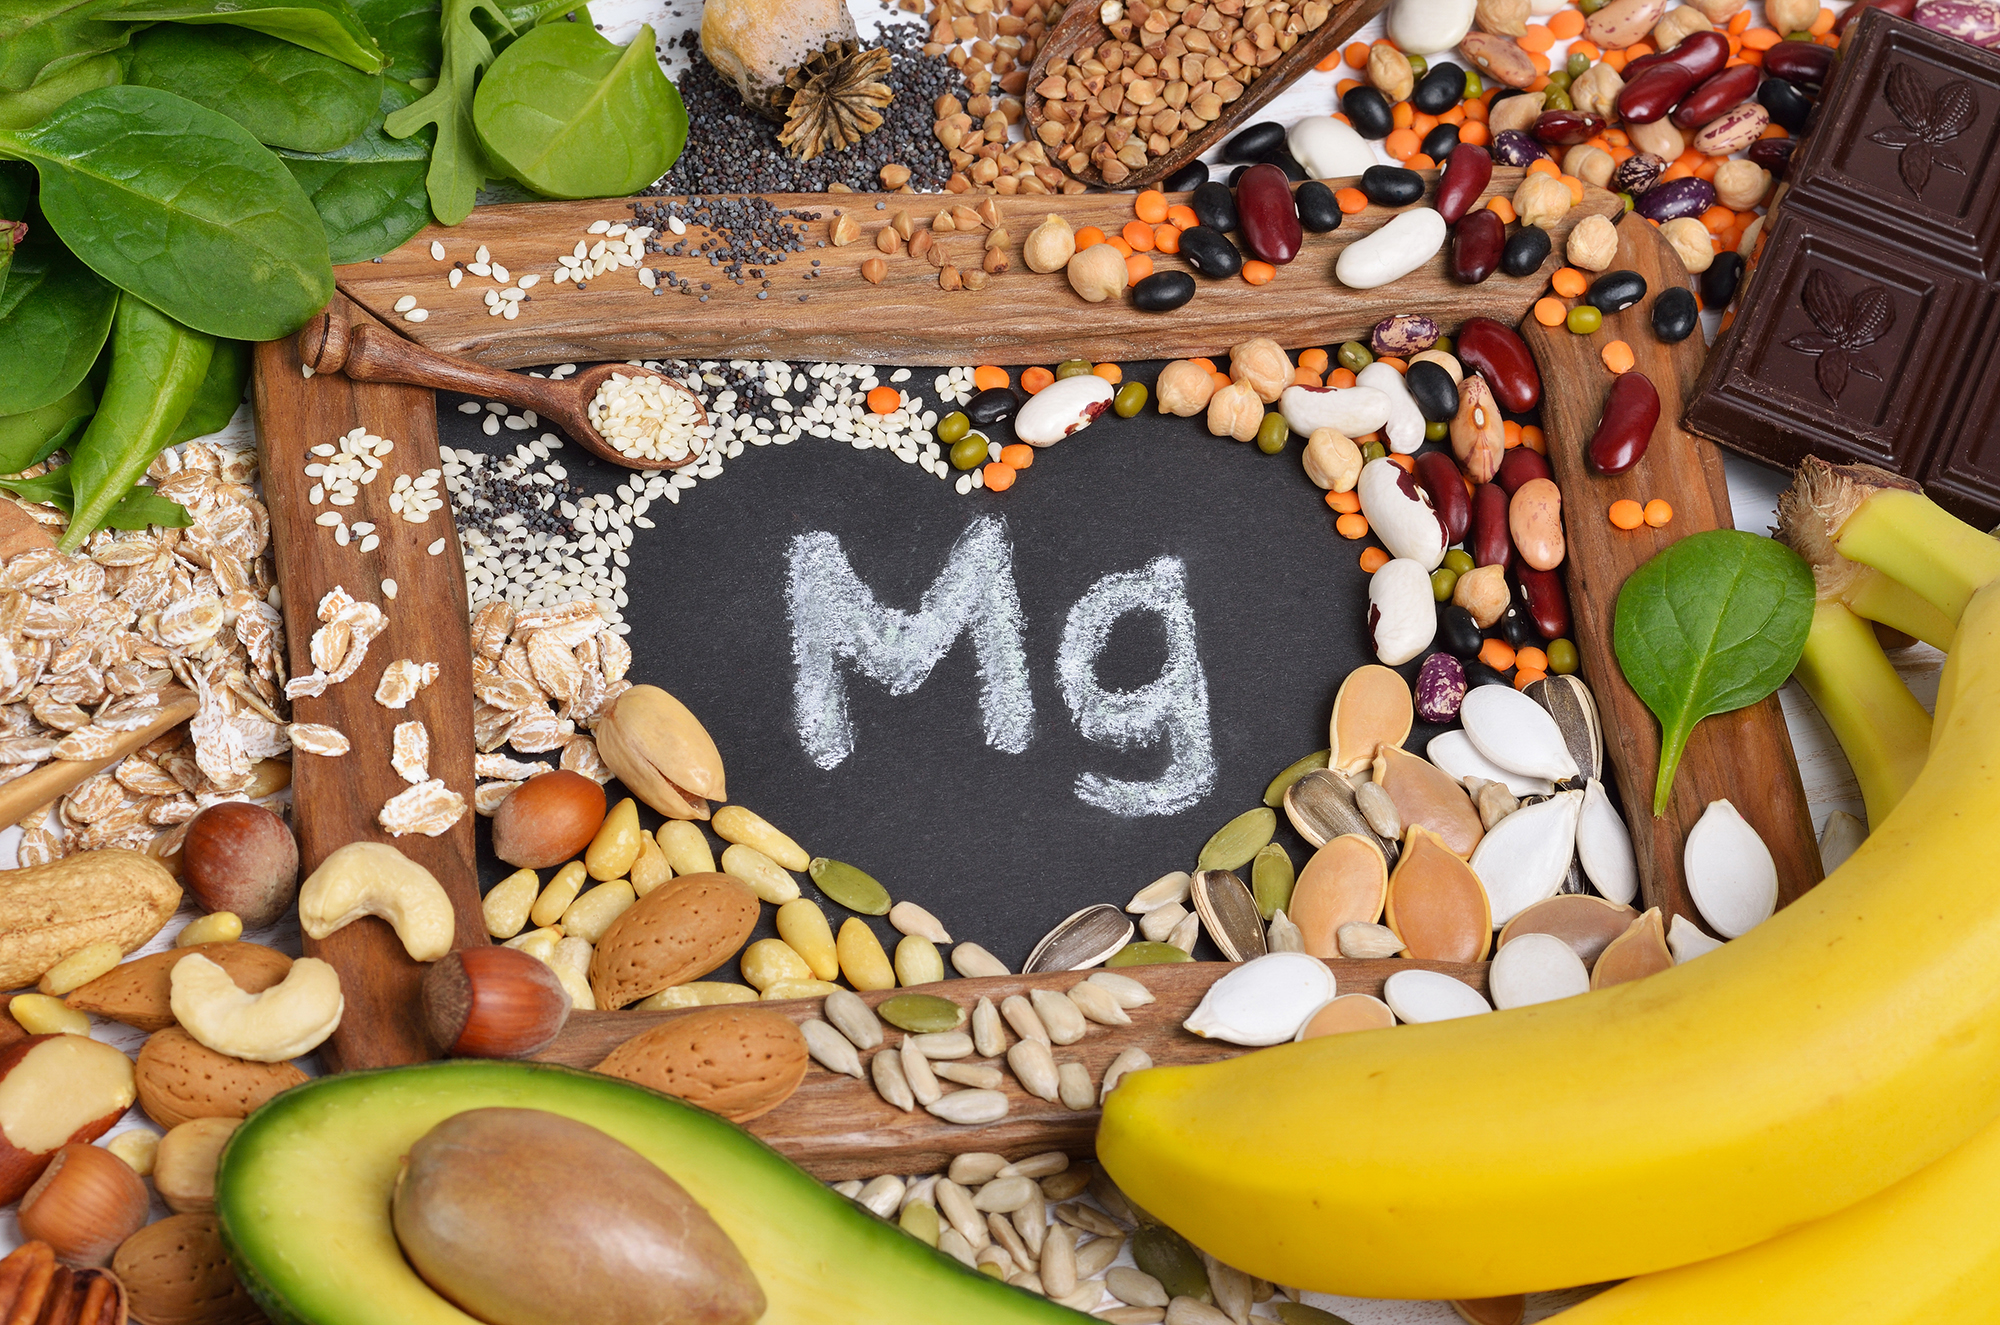 Food sources for Magnesium